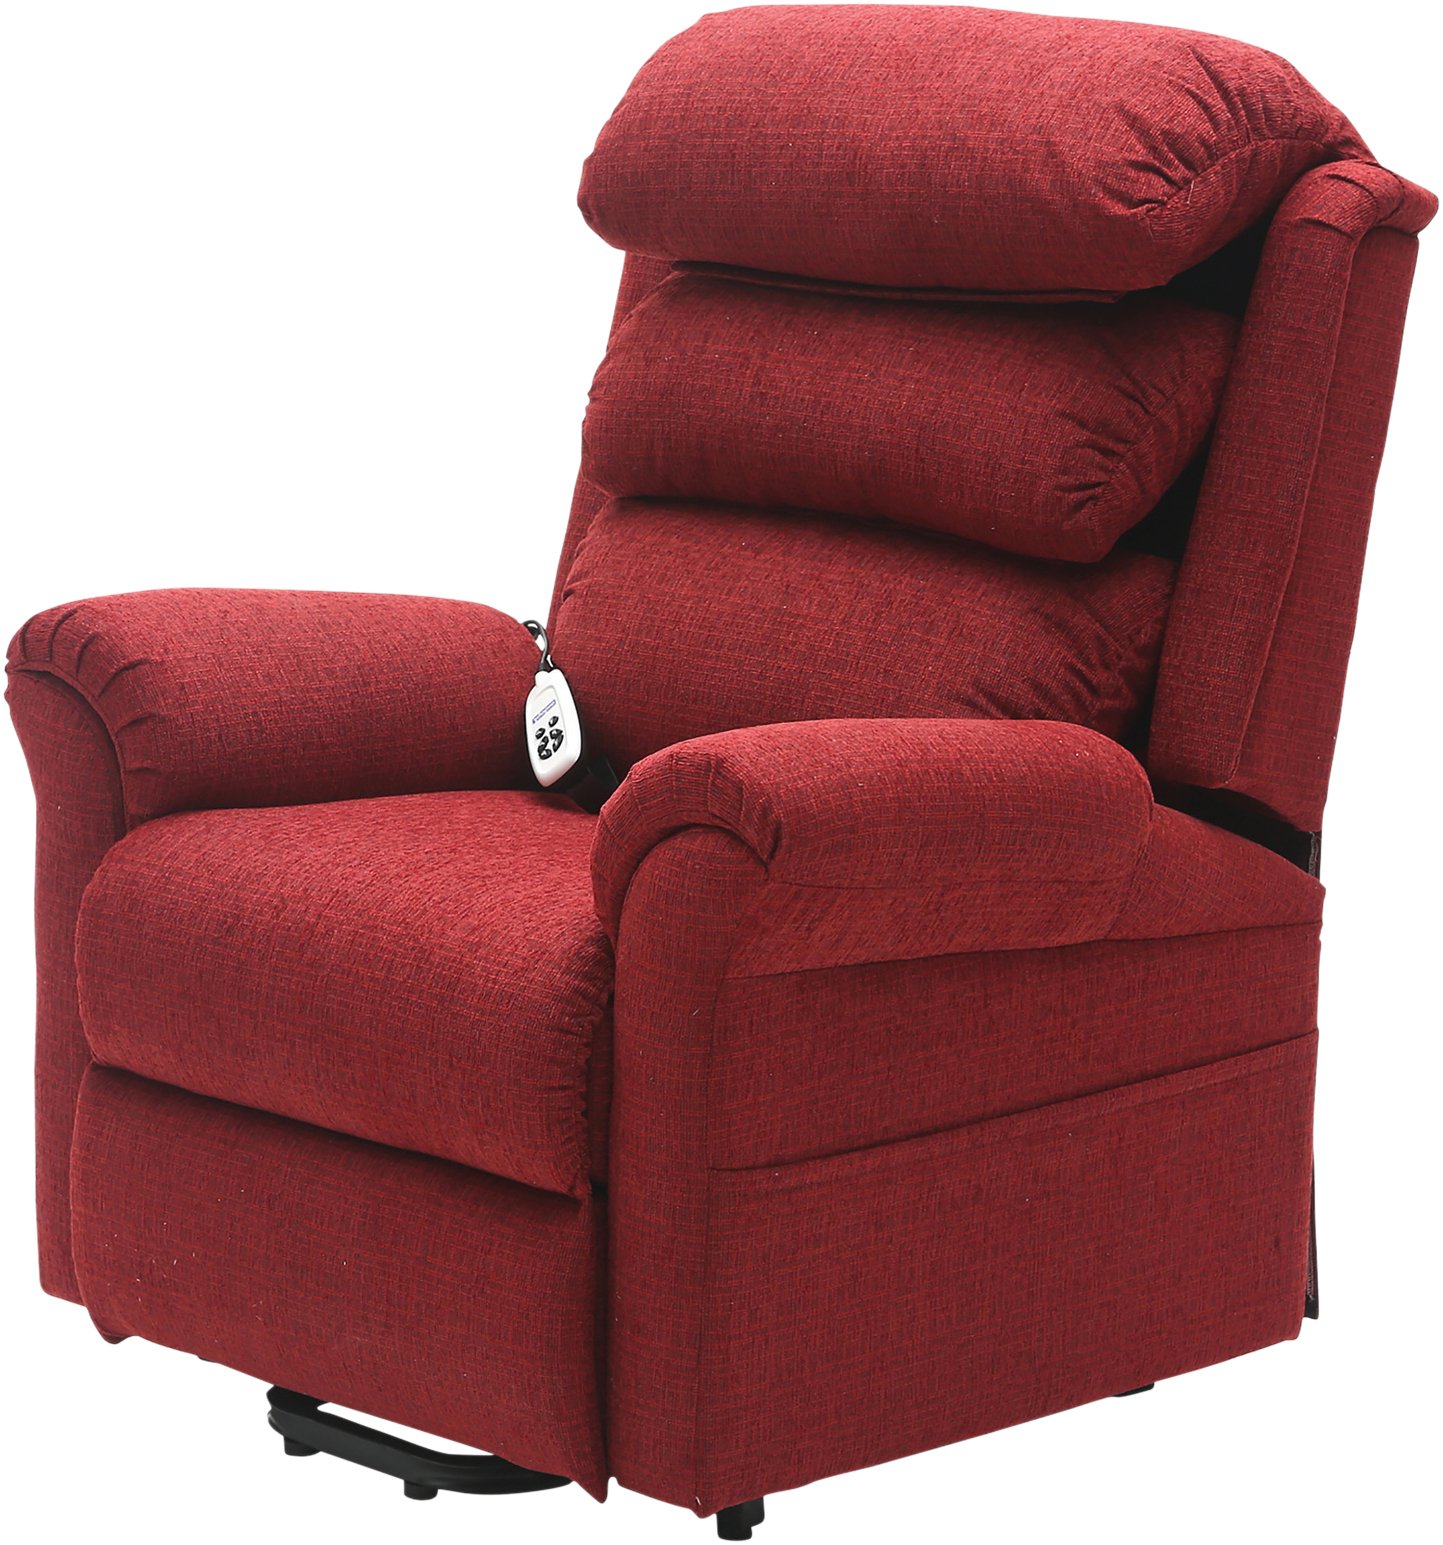 rise-recliner-red